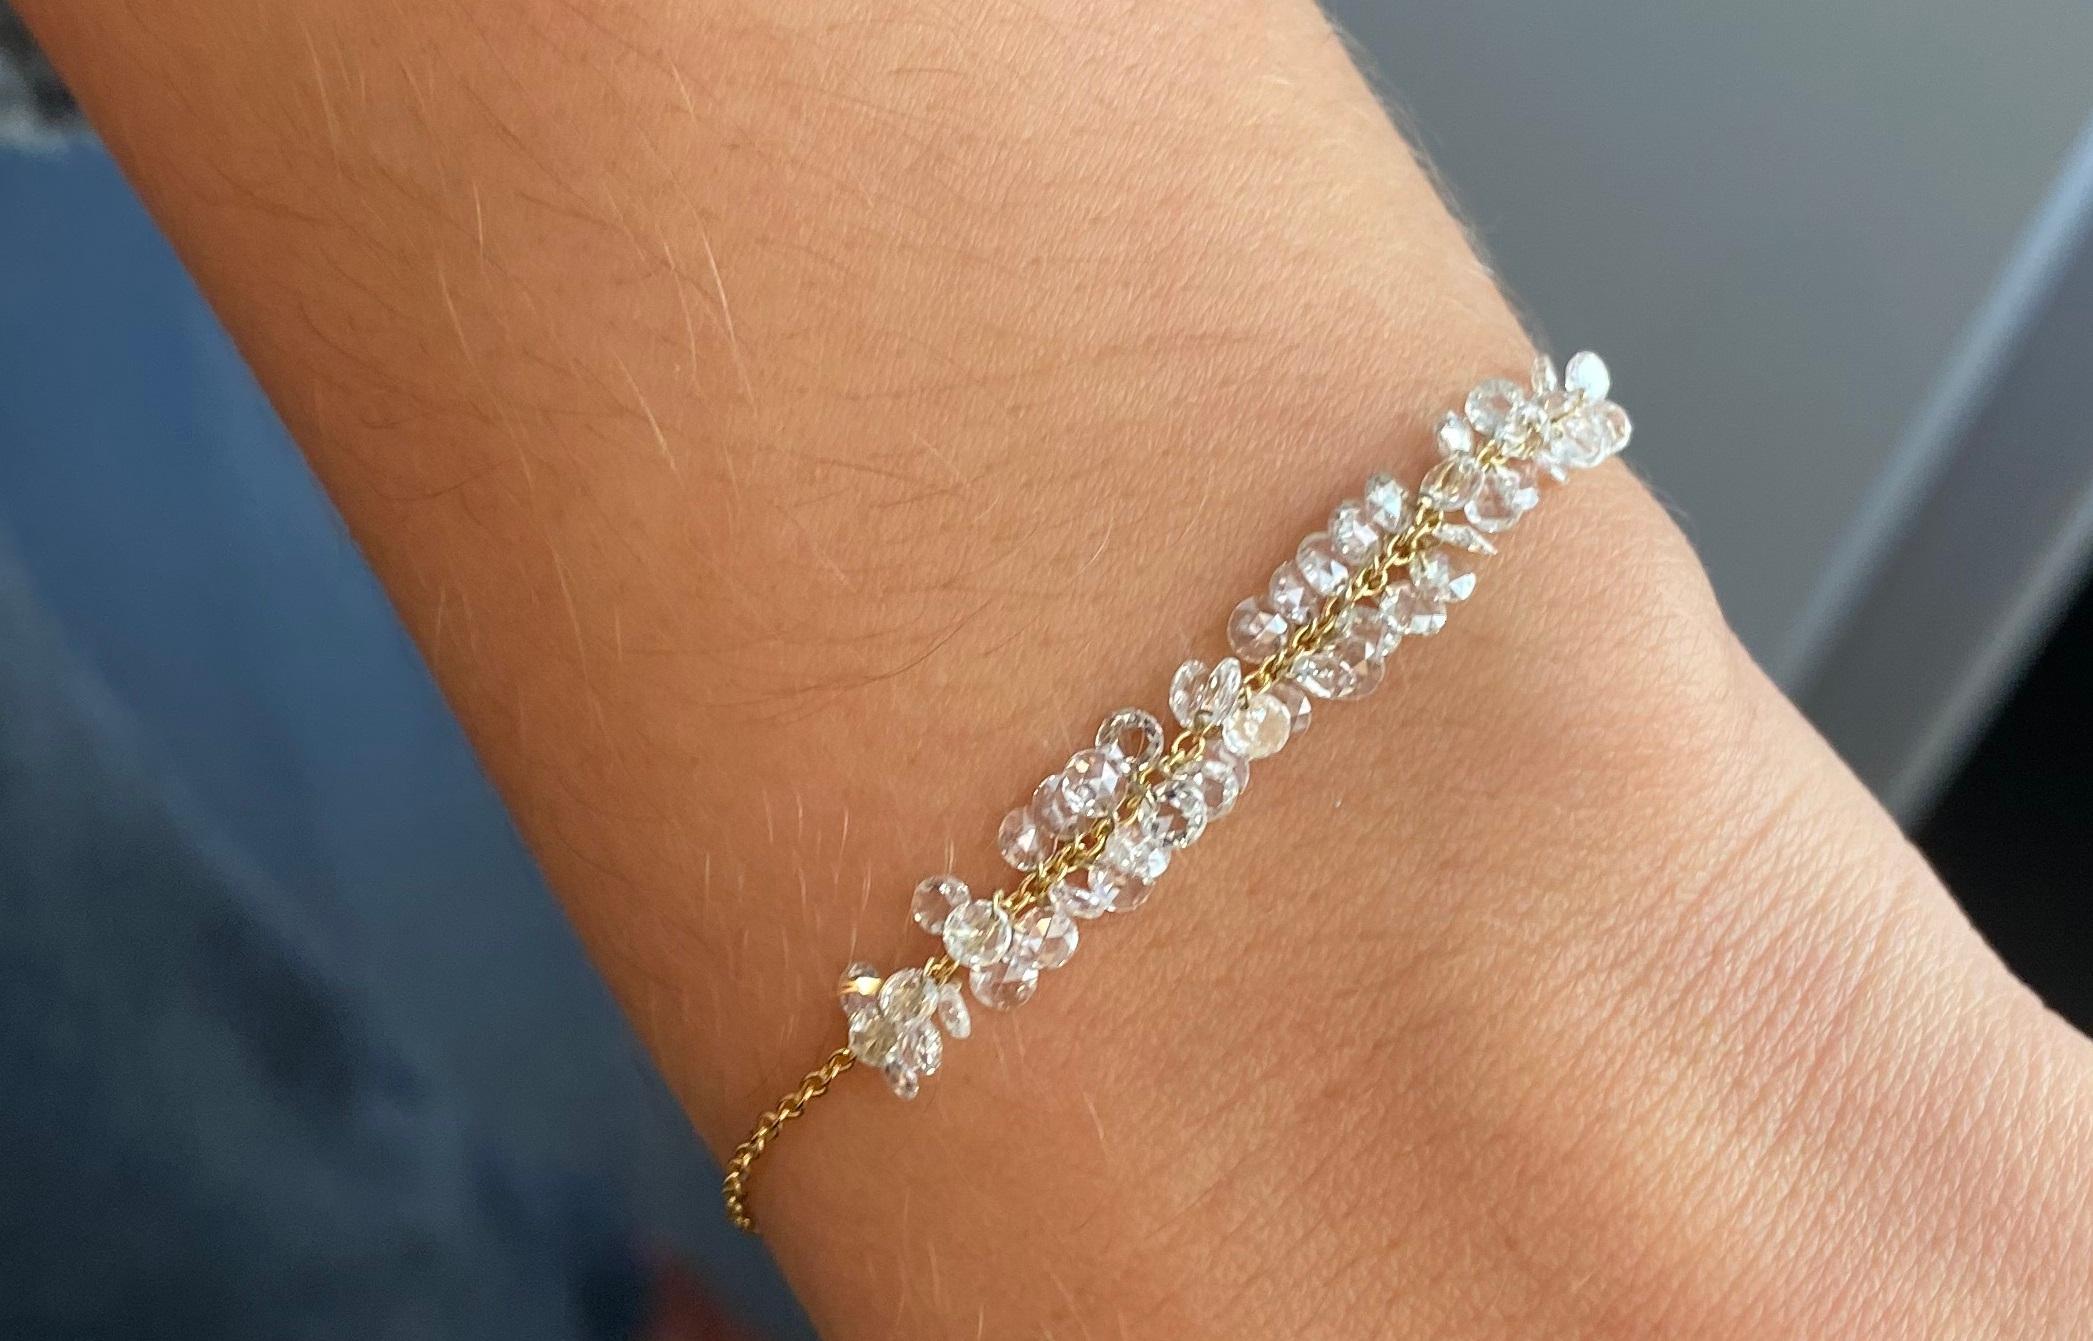 PANIM Rosecut Diamond Fringe Dangling Bracelet in 18K White Gold

Decorated with top quality round rosecut diamond , our Fringe Dangling bracelet is finished in 18K gold for a luxuriously warm finish. Designed to float delicately on your wrist, each